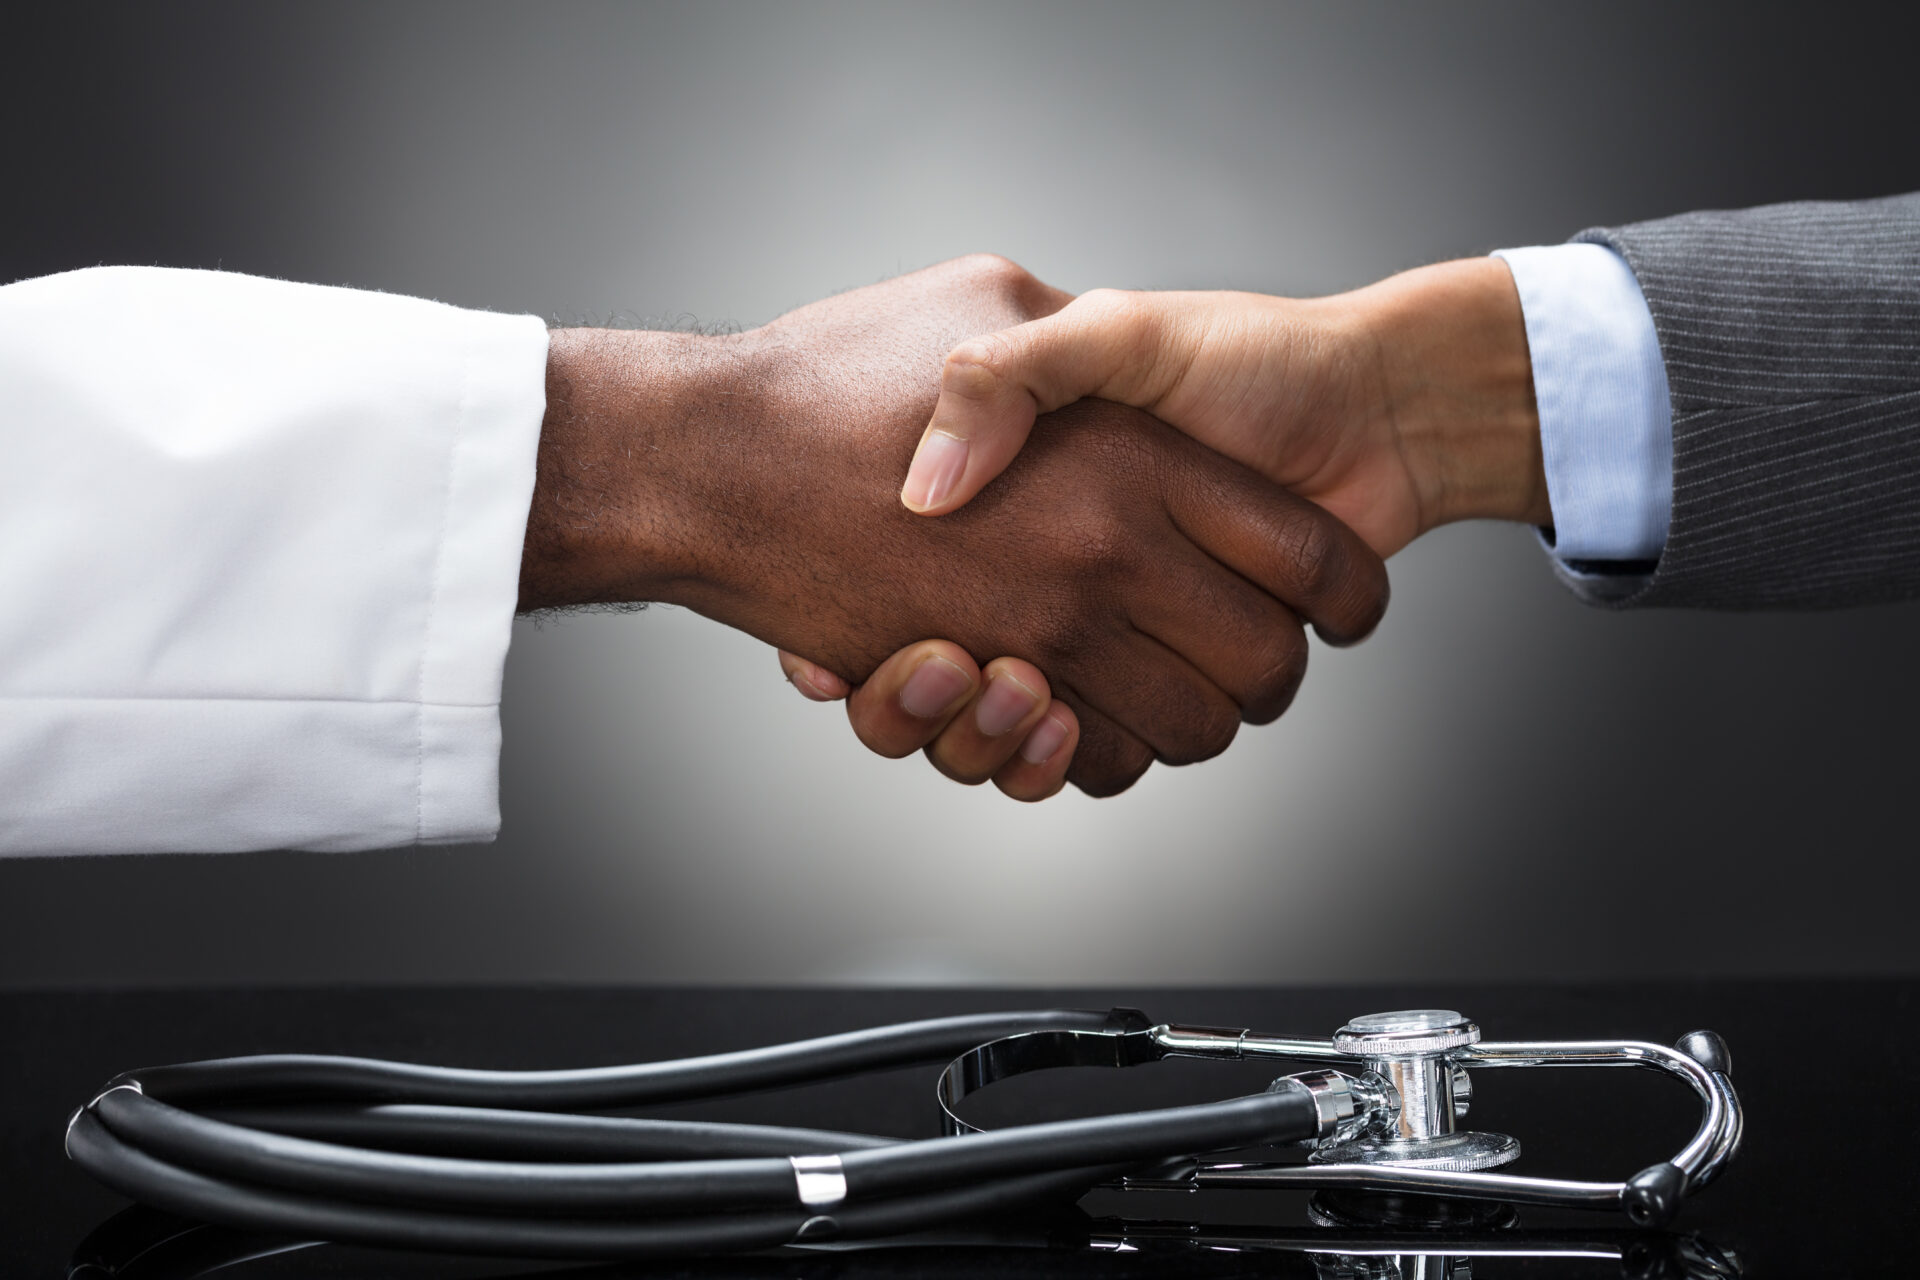 Doctor and business man shaking hands over a stethoscope